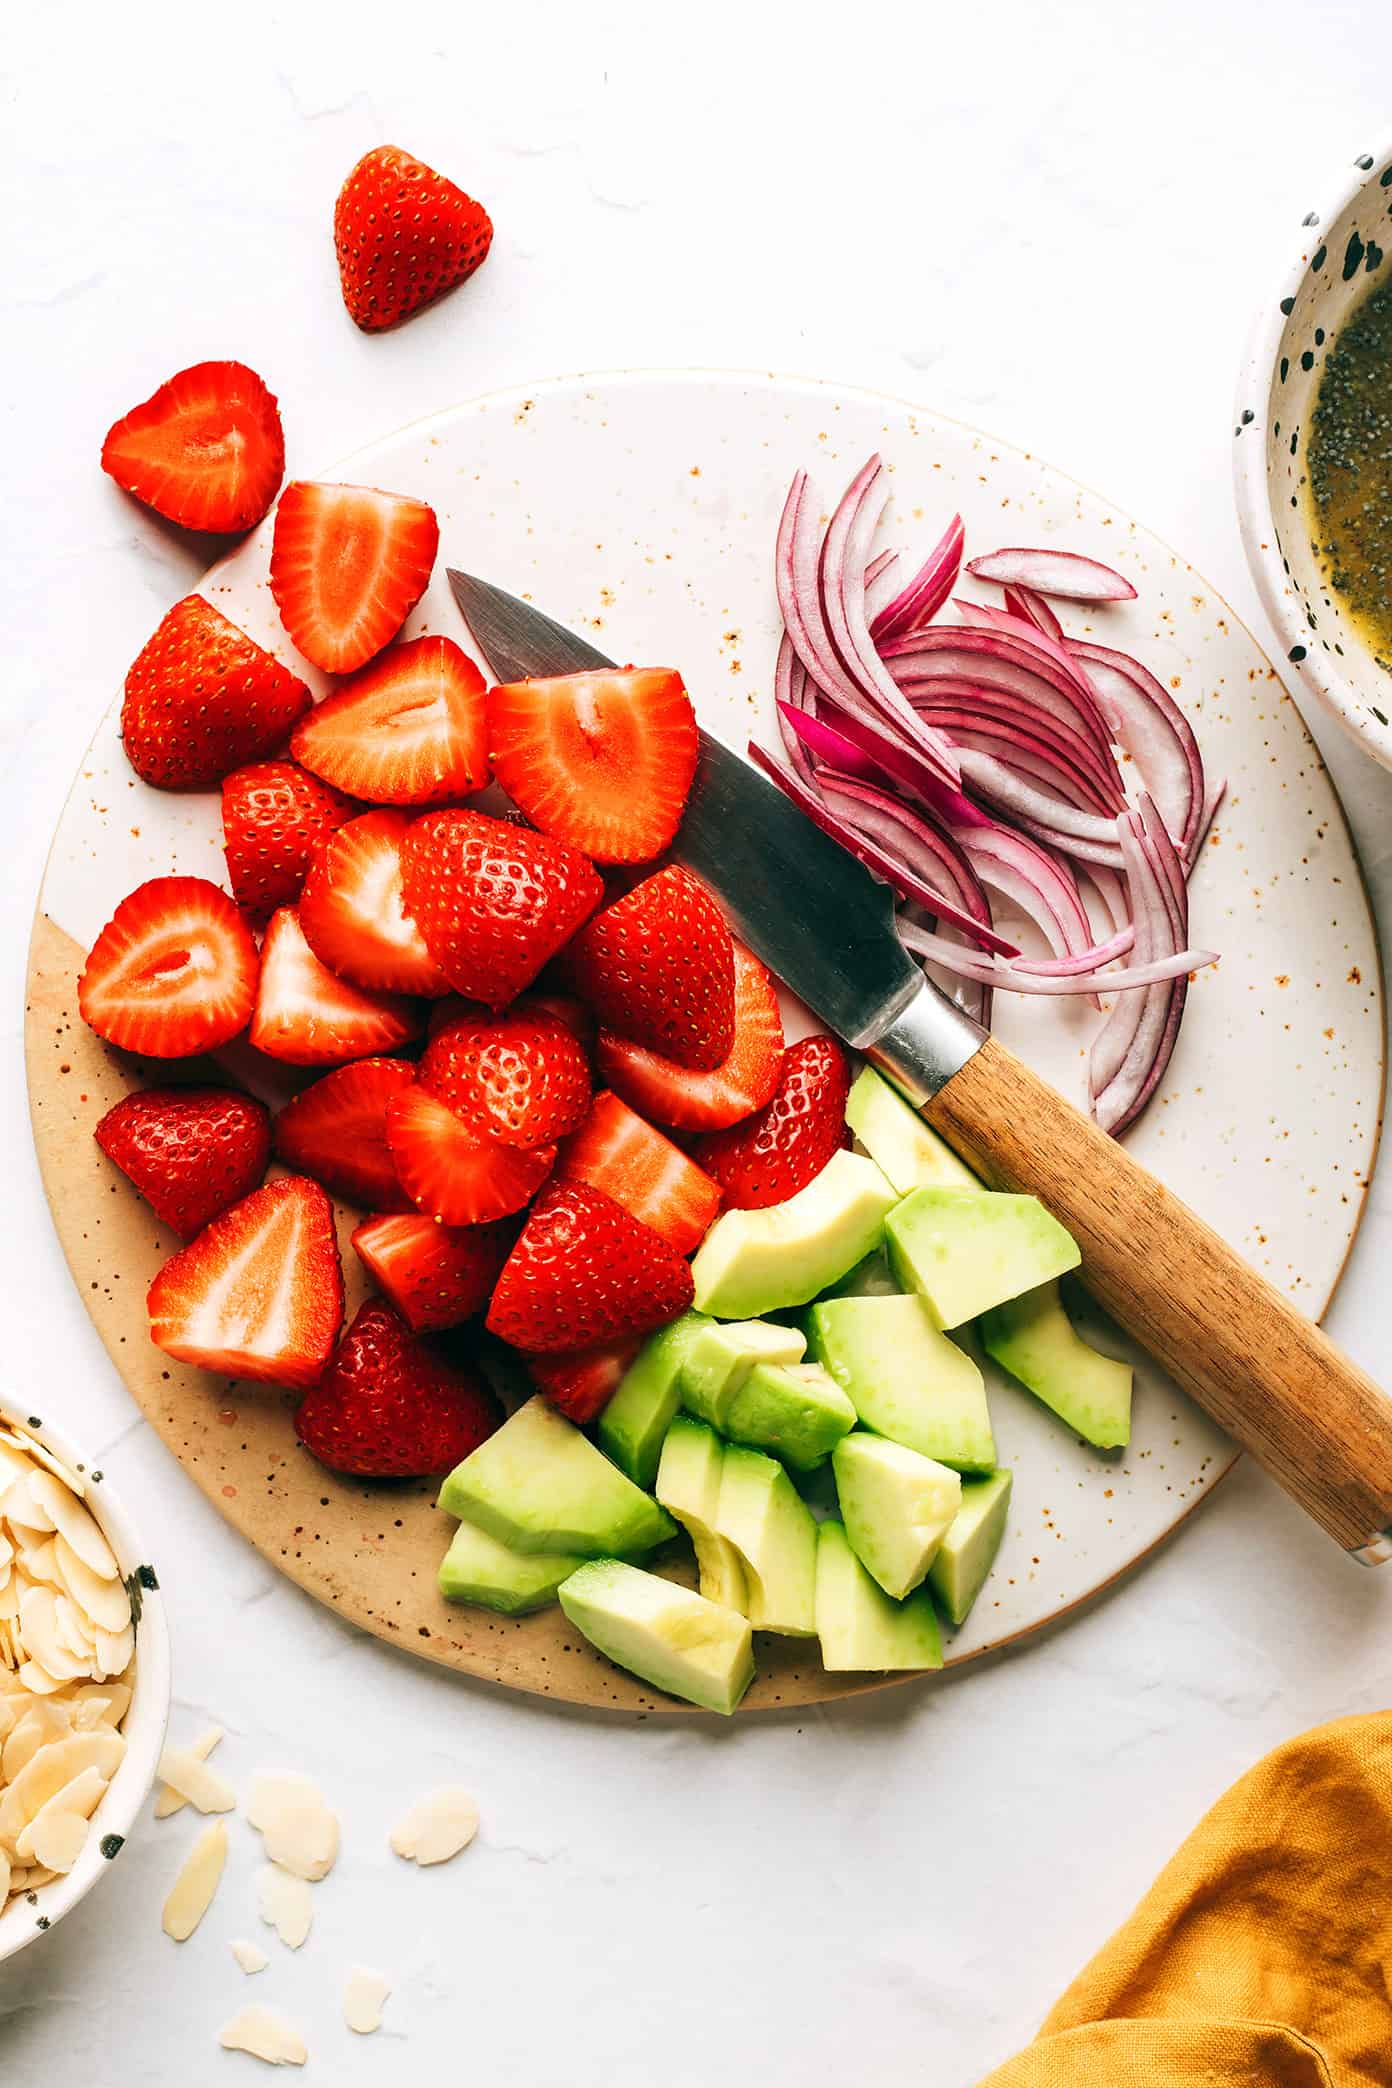 Slice strawberries, avocado and red onion